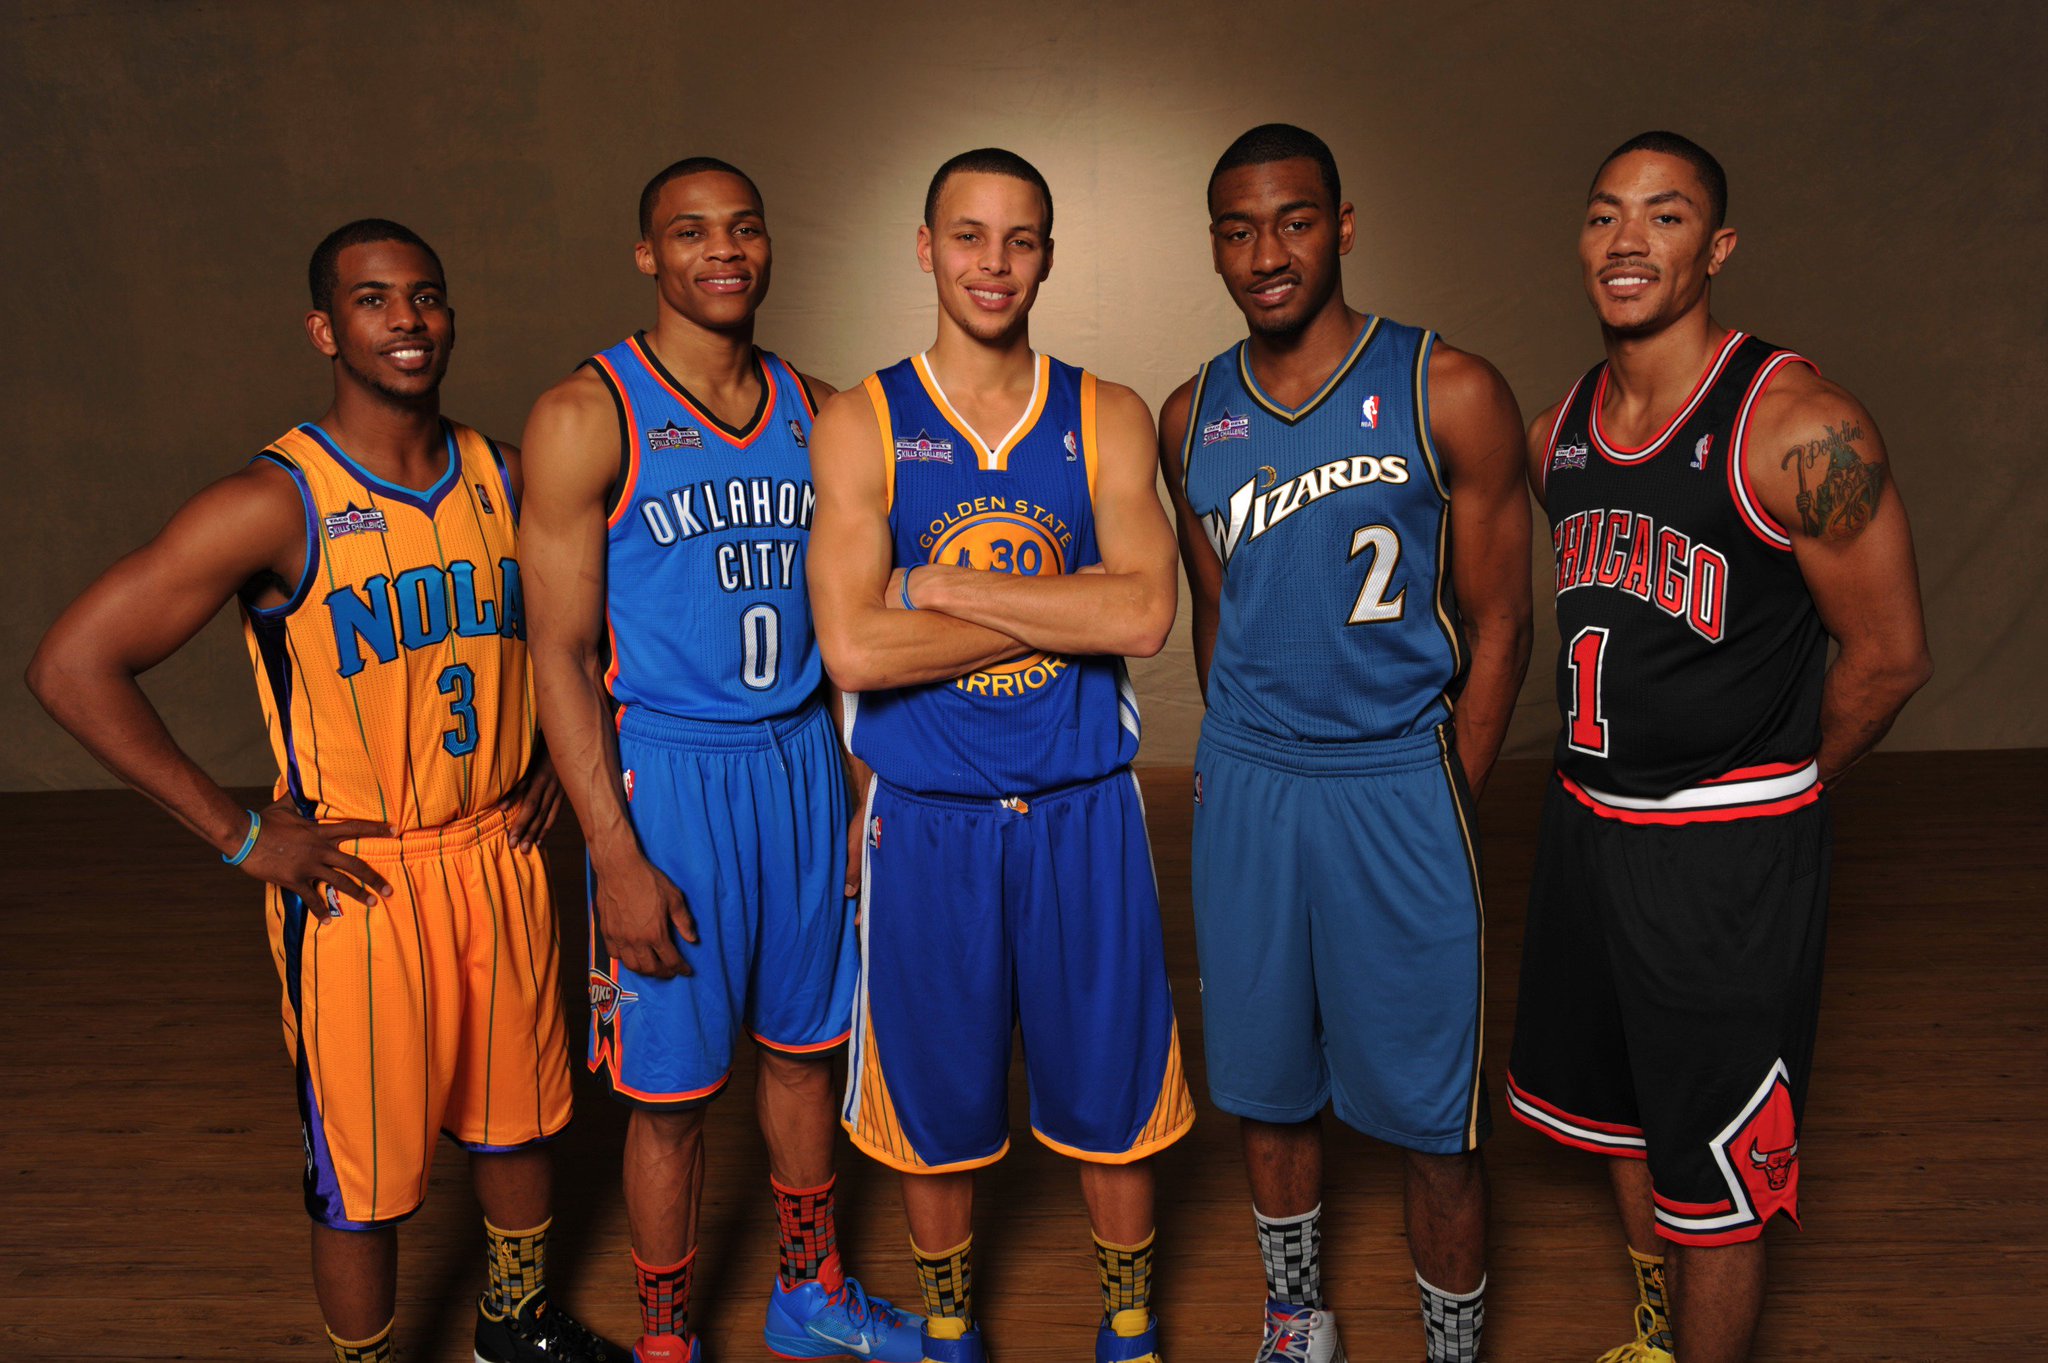 SLAM a Twitter: "Best player in this pic? #tbtâ¦ "